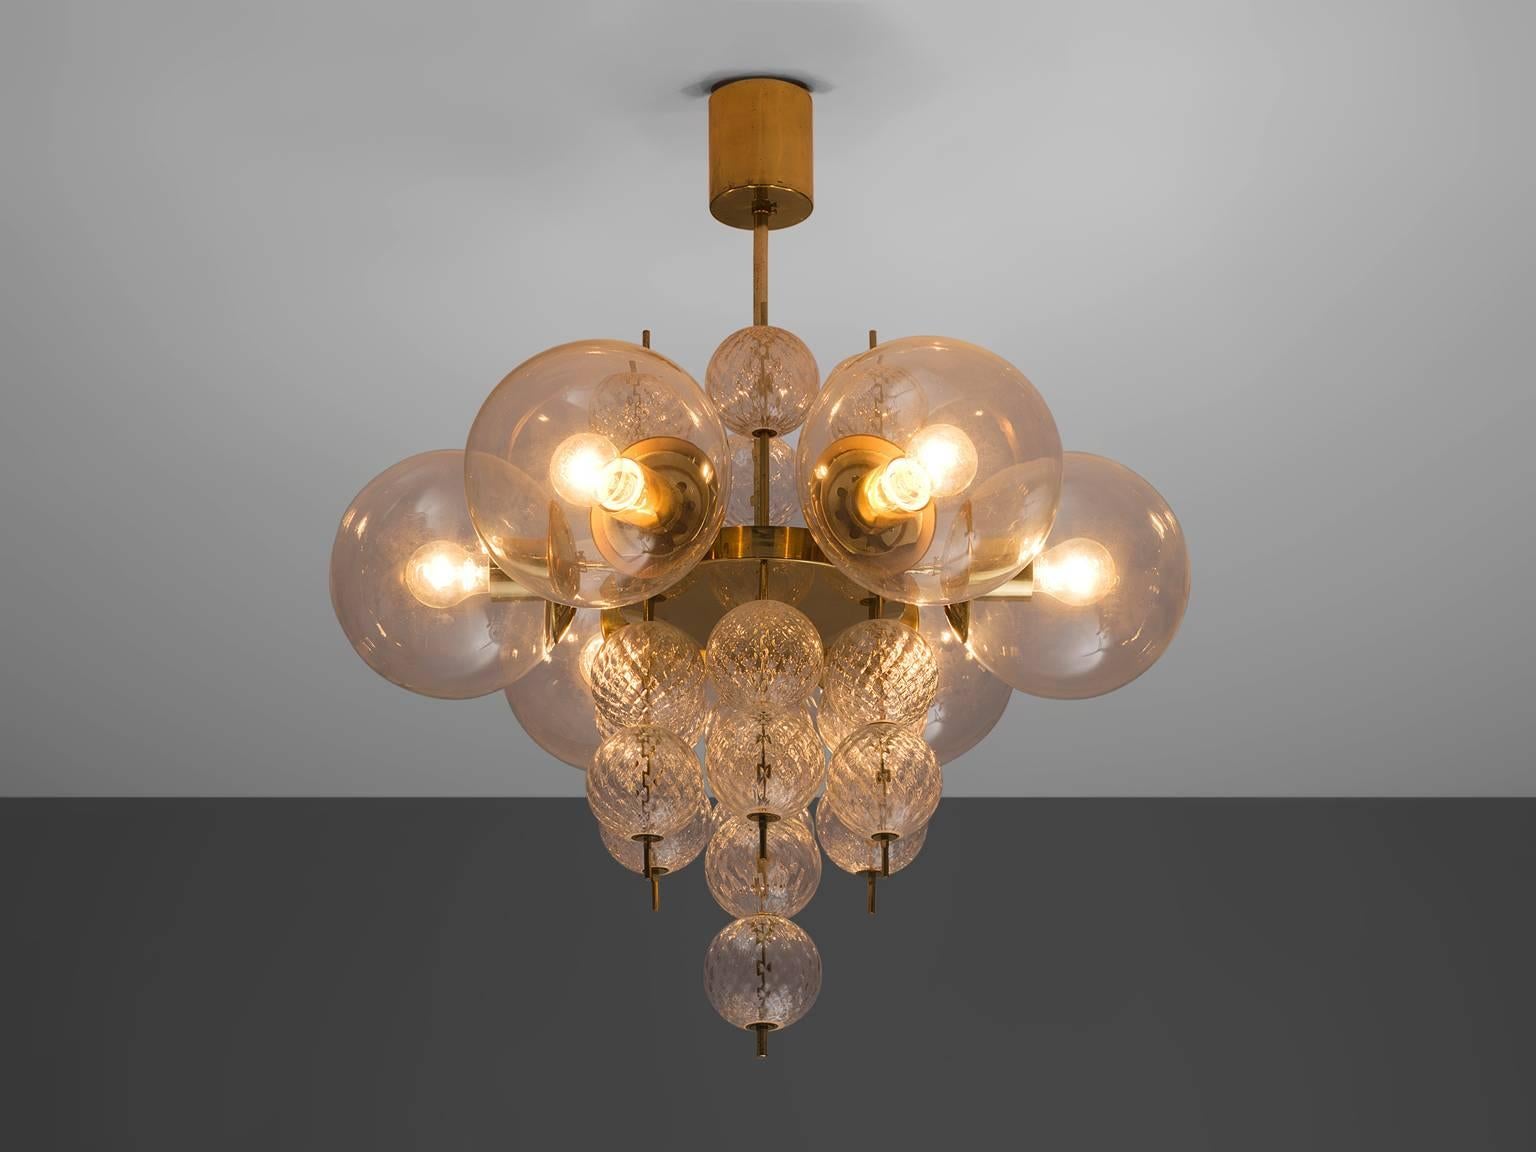 Set of two brass chandeliers, brass and glass bulbs, Austria, 1960s.

Set of two chandeliers with brass fixture and art-glass. The chandelier with brass frame consist of six lights, formed in a circle, with glass shades. The pleasant light it